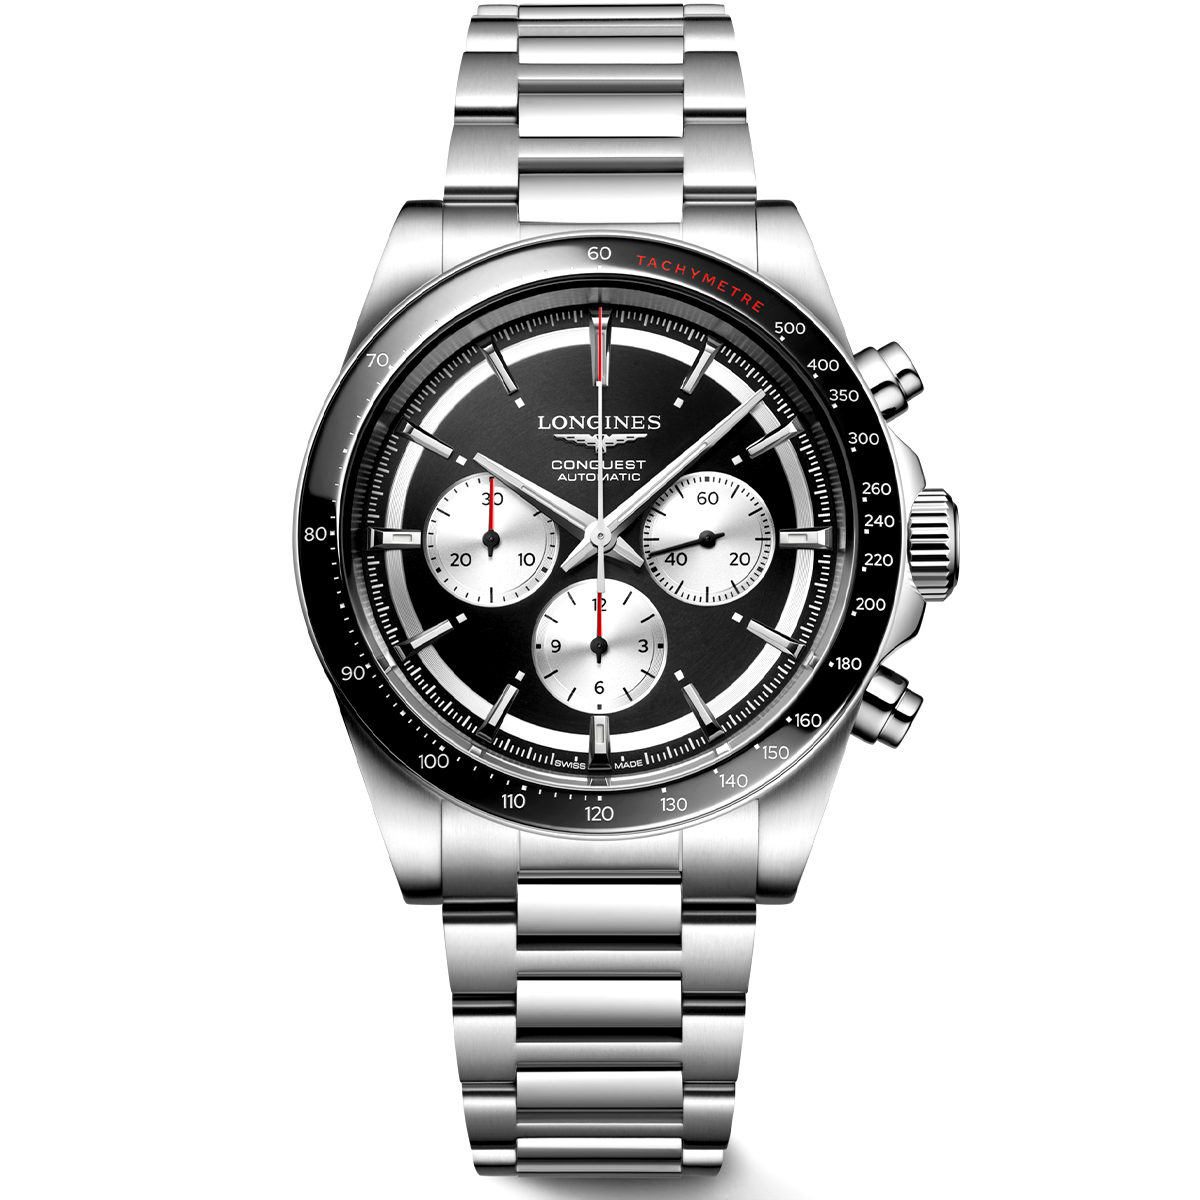 Conquest Chronograph 42mm Black/Silver Dial Automatic Watch